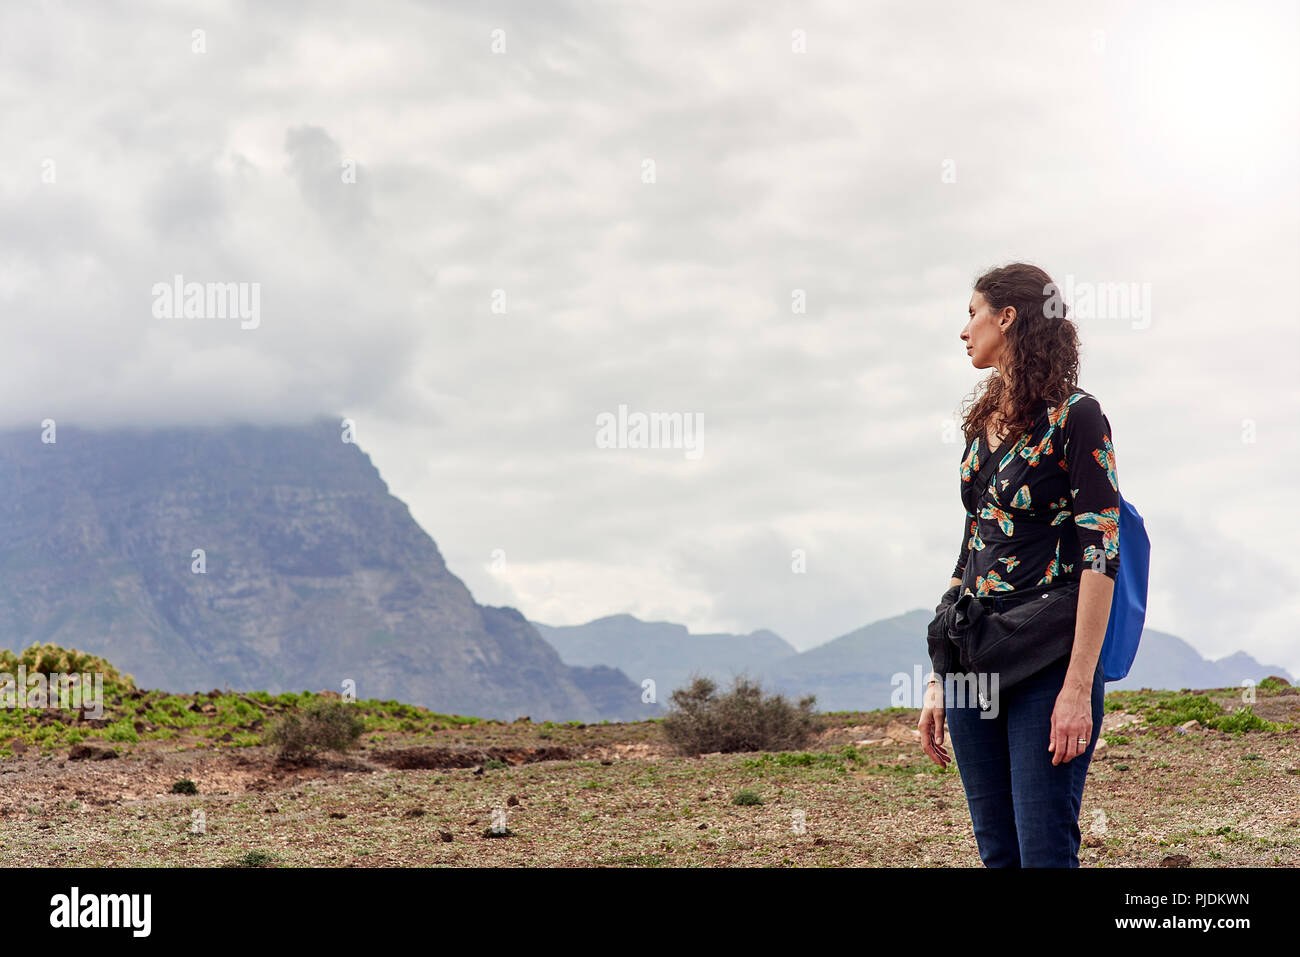 Woman looking out toward low cloud over mountains, Las Palmas, Gran Canaria, Canary Islands, Spain Stock Photo